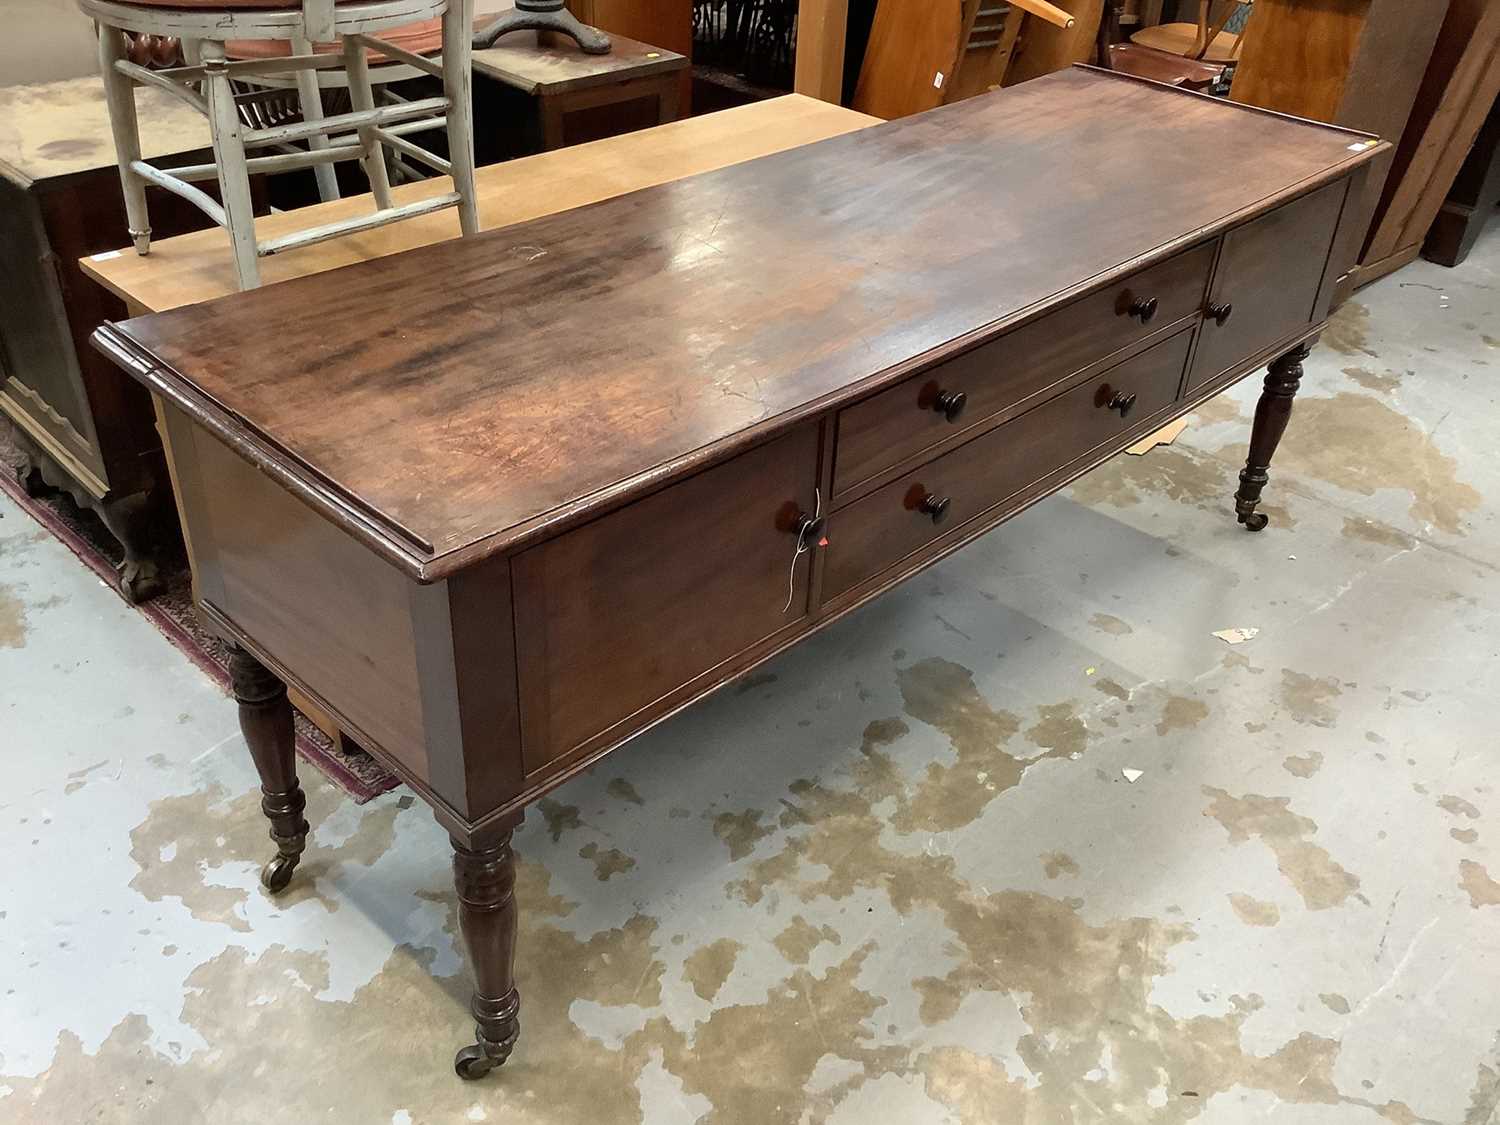 Lot 919 - George IV mahogany sideboard with two drawers flanked by twin cupboards, on turned legs and brass castors 
Provenance: Removed from Argyll House, Kings Road, London